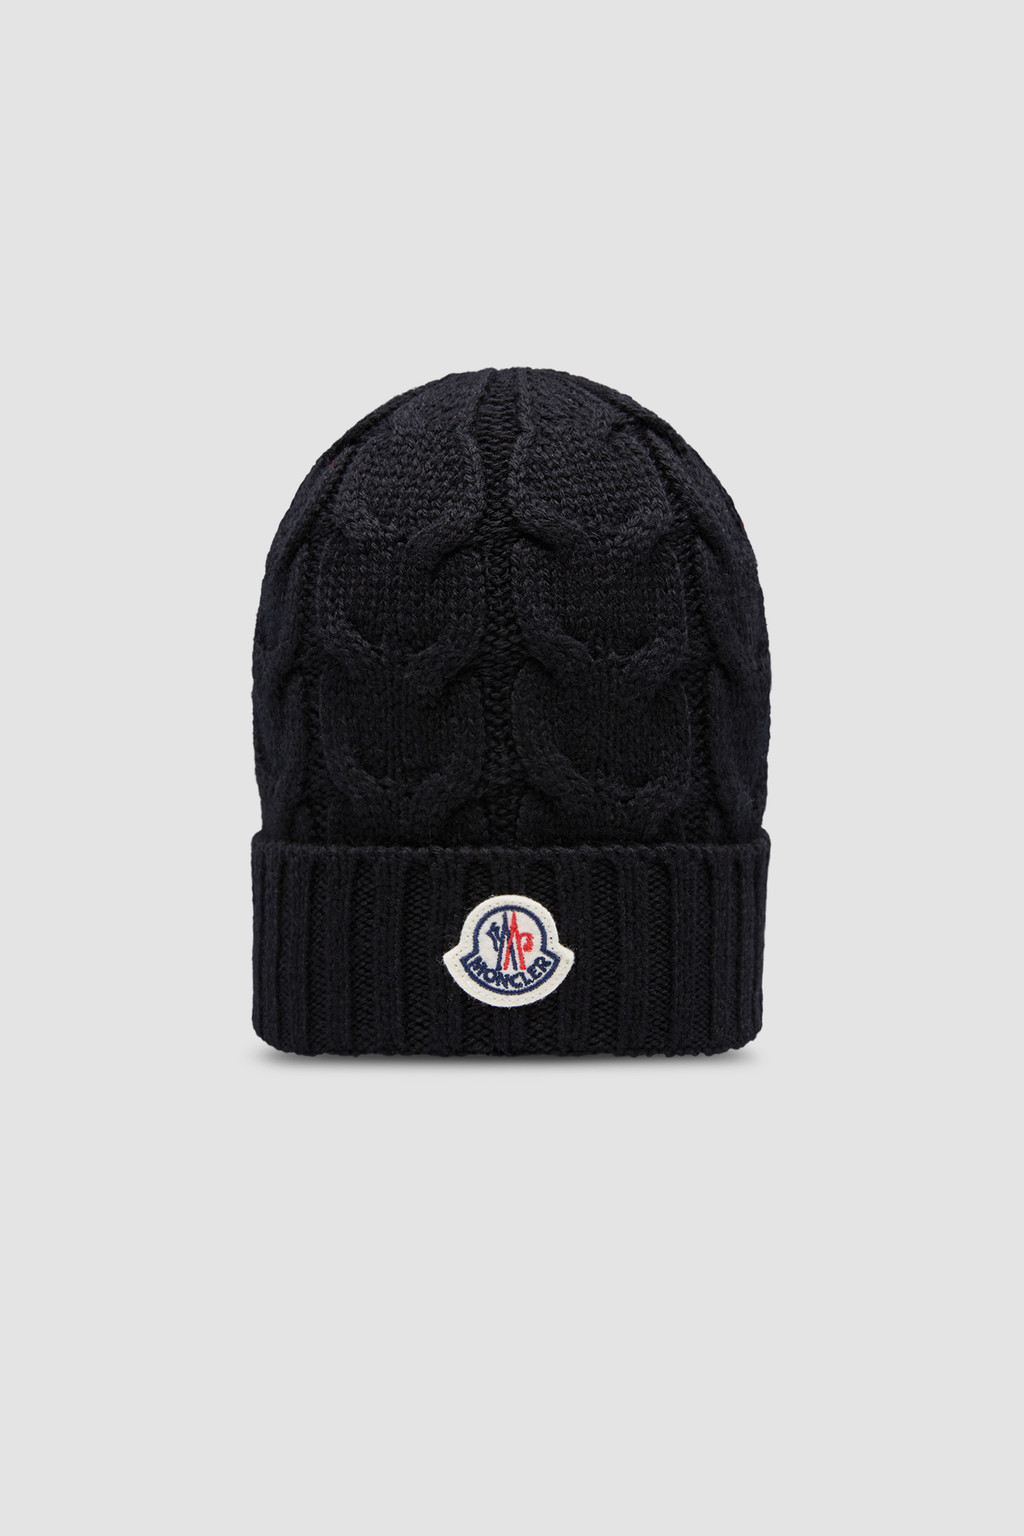 Accessories for Boys - Shoes, Gloves, Scarves & Beanies | Moncler